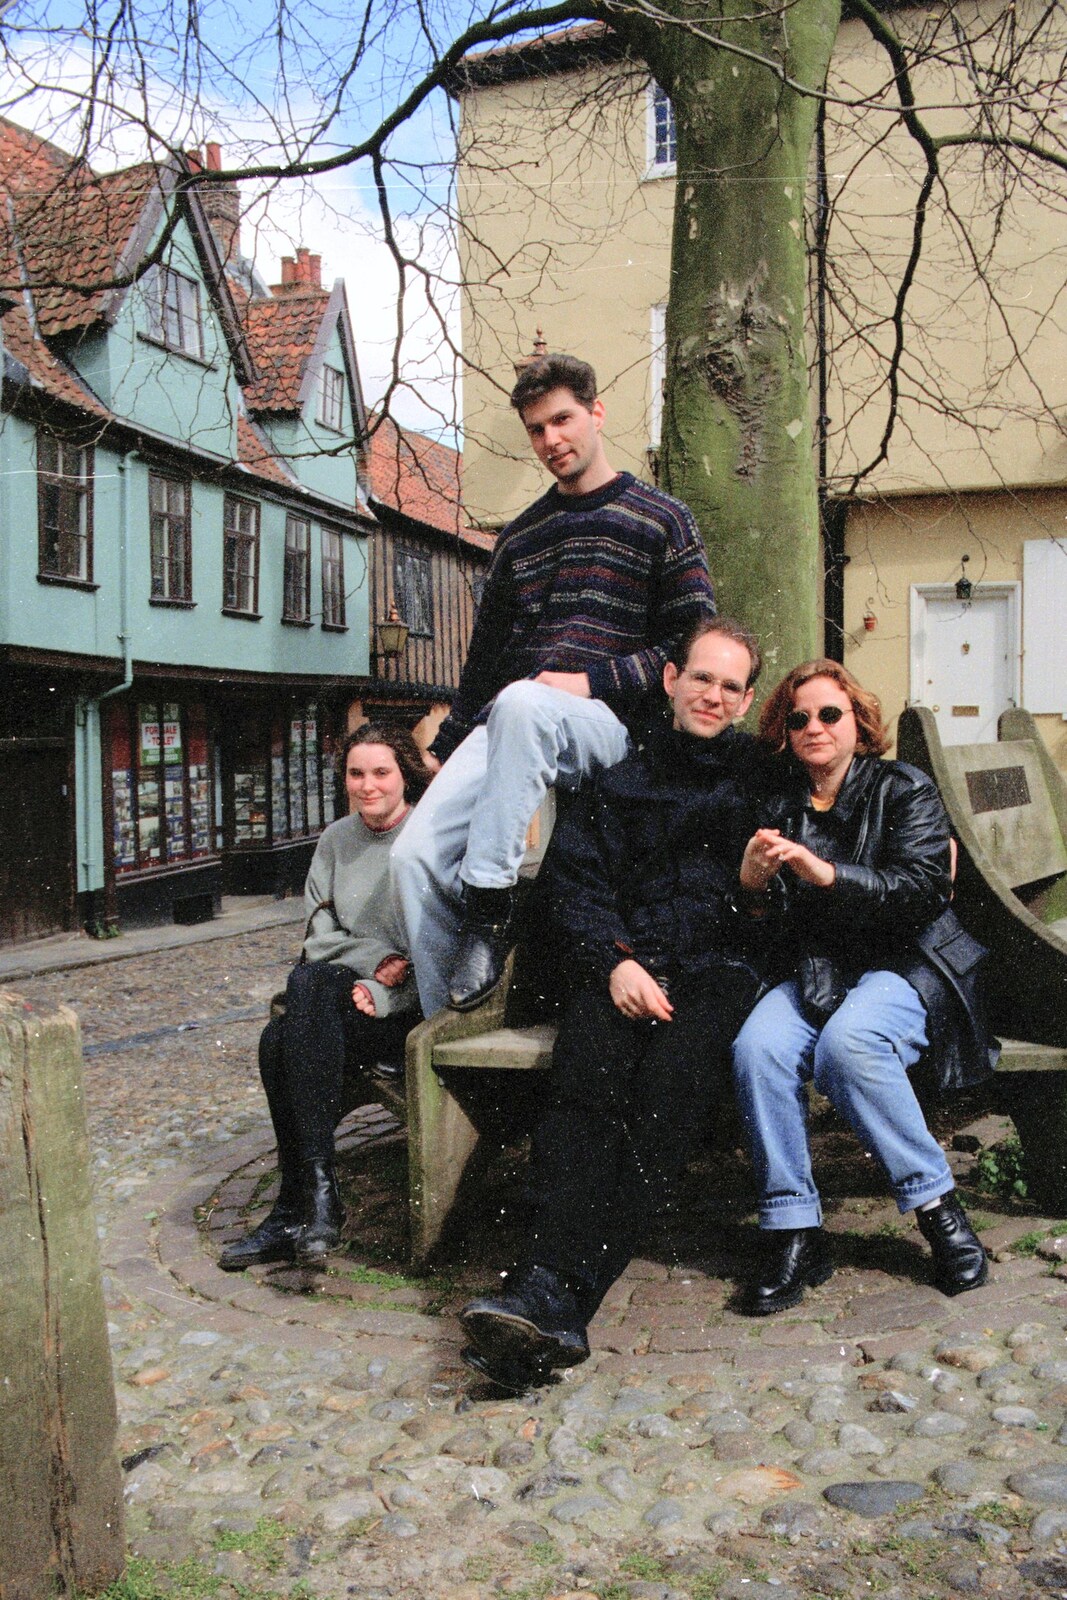 A group photo on Elm Hill from A Phil and Sean Weekend, and Bedroom Building, Brome, Norwich and Southwold - 18th April 1995